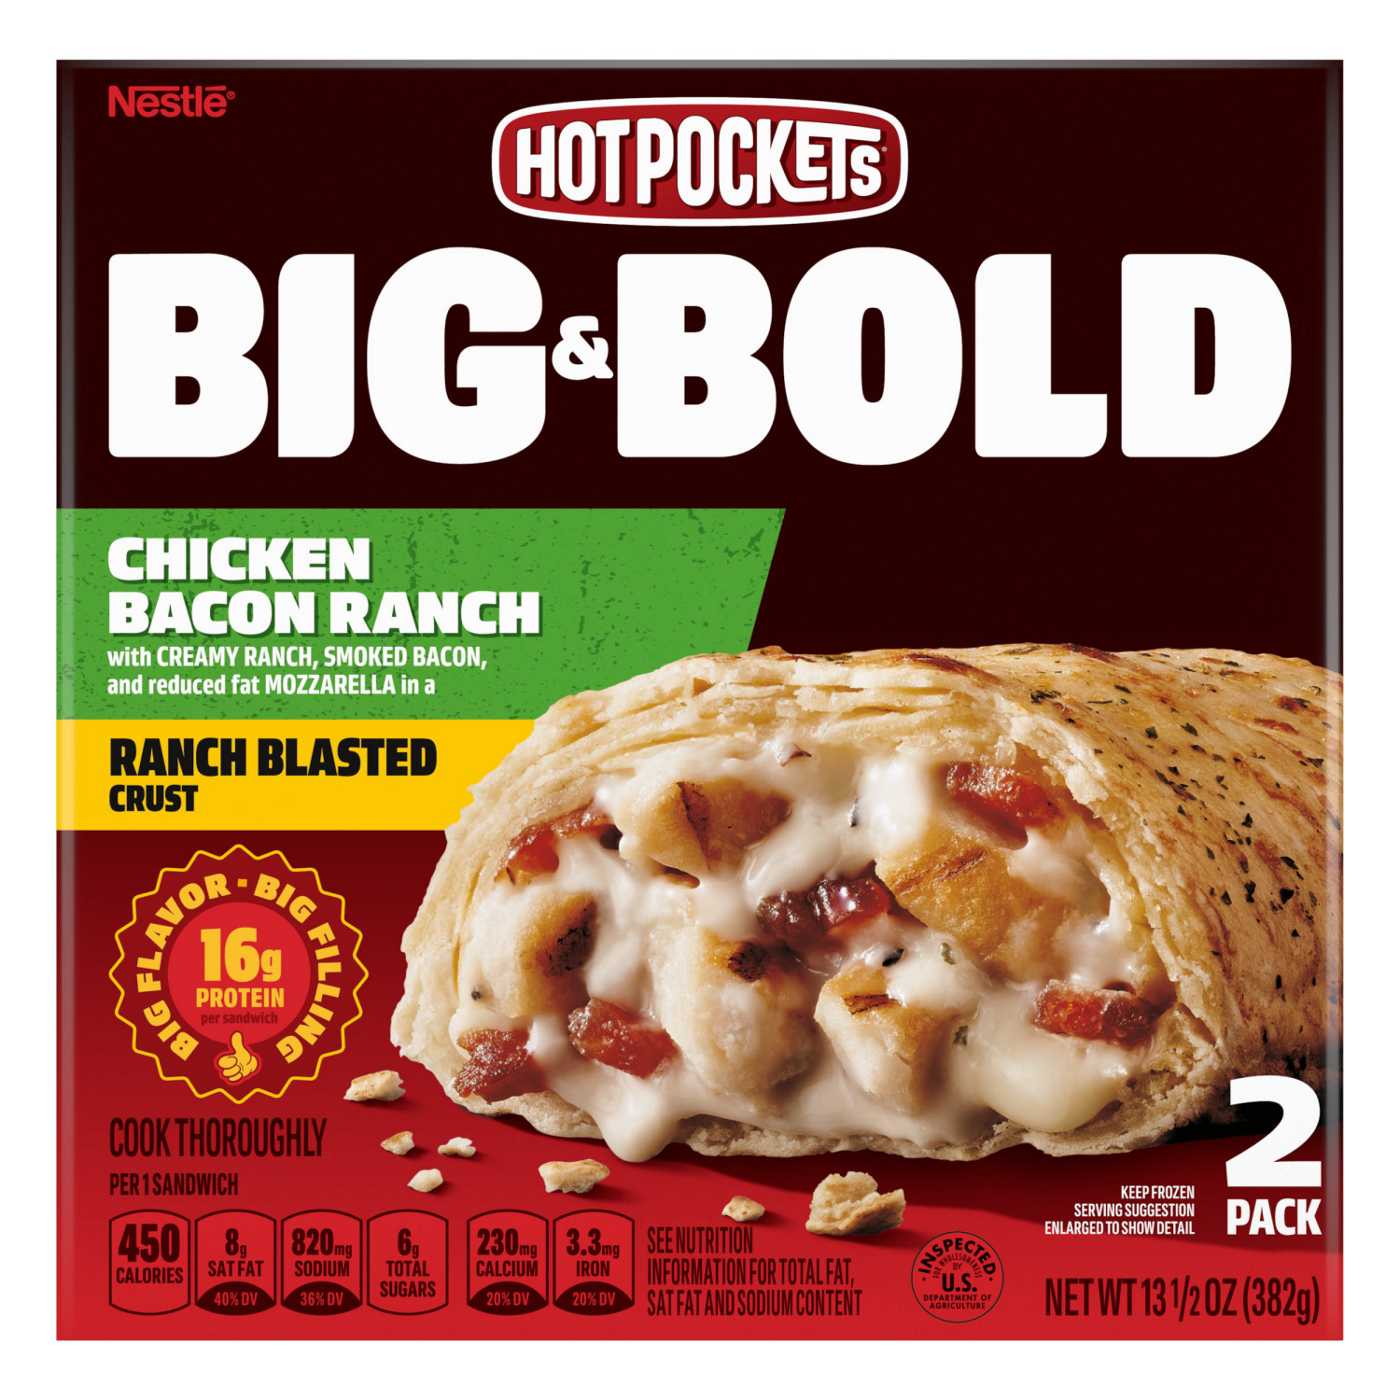 Hot Pockets Big & Bold Big & Bold Chicken Bacon Ranch Sandwiches; image 1 of 8